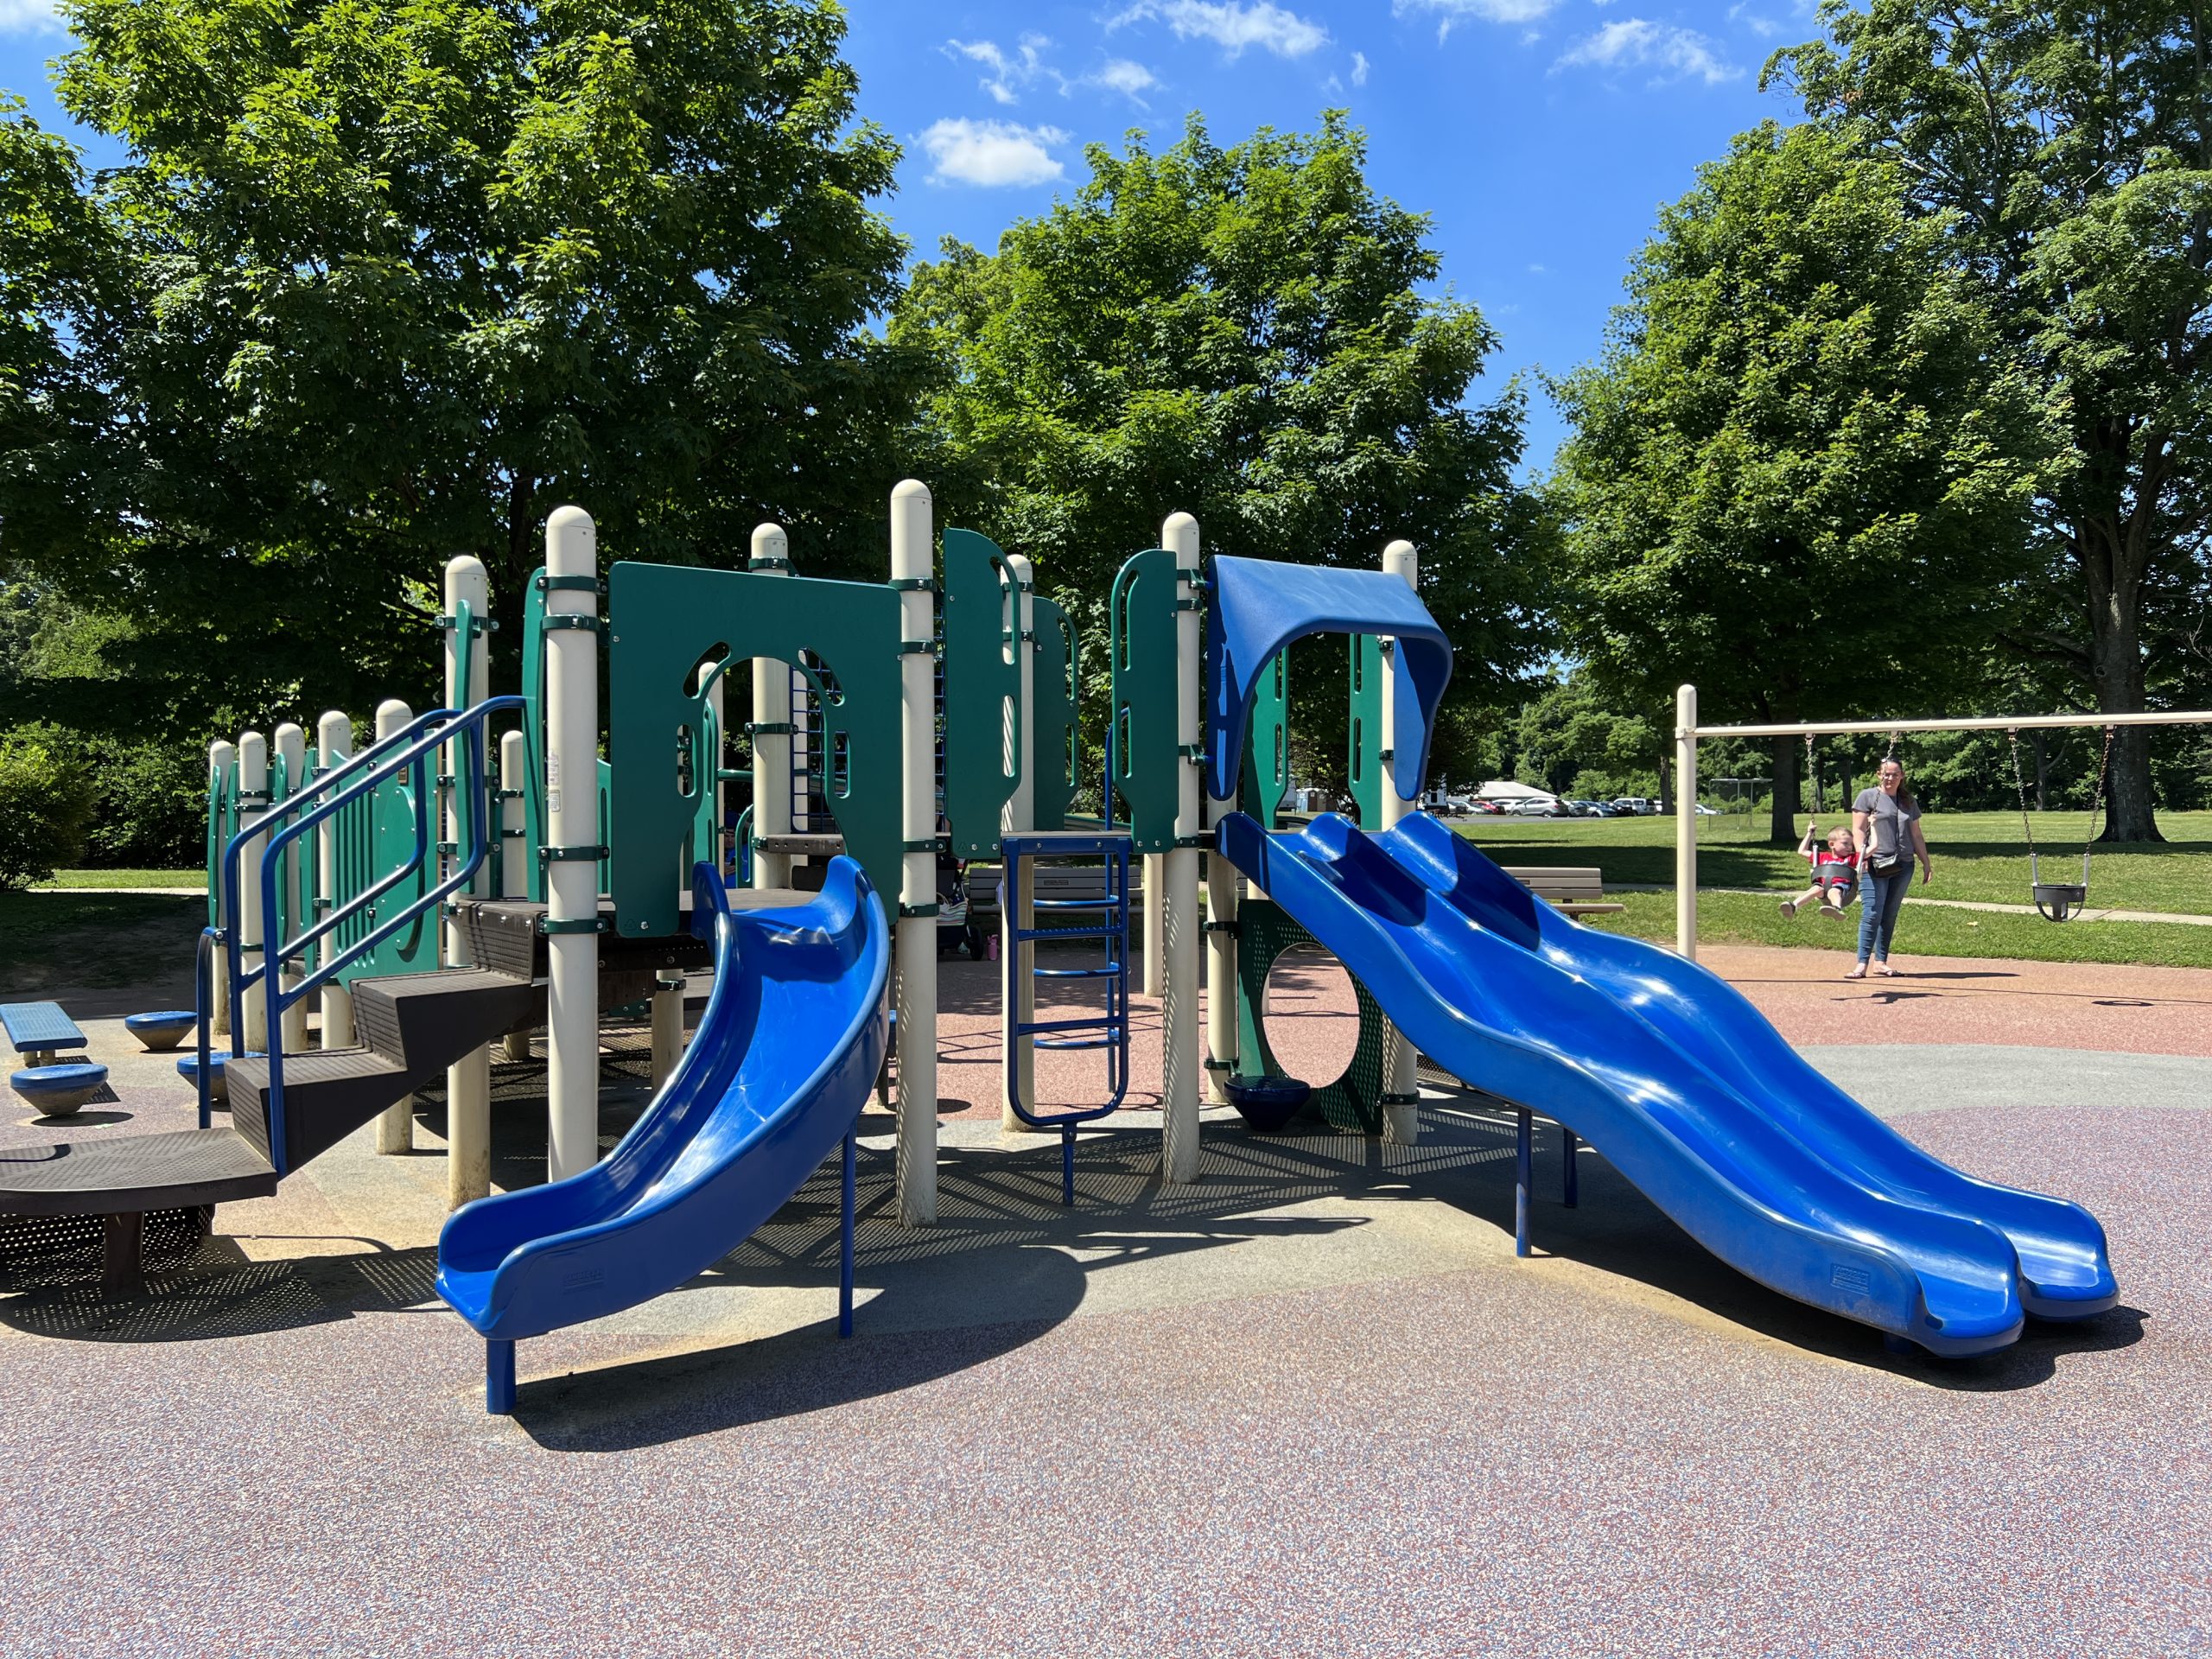 Challenger Place Park Playground in Colts Neck NJ both slides on toddler playground